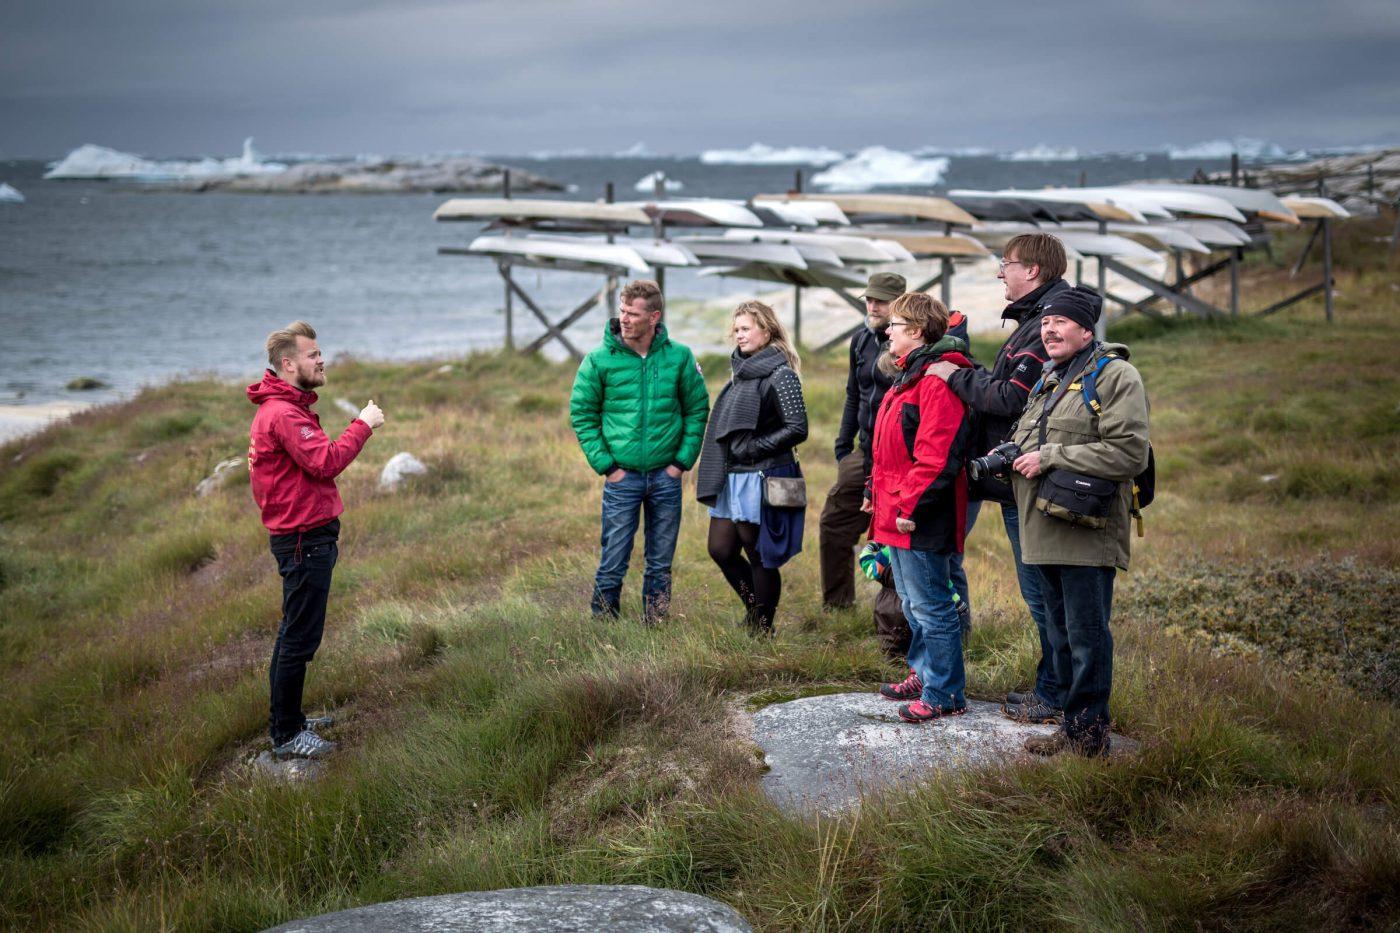 A guided walk in Ilulissat with traditional Greenland kayaks in the background. Photo by Mads Pihl